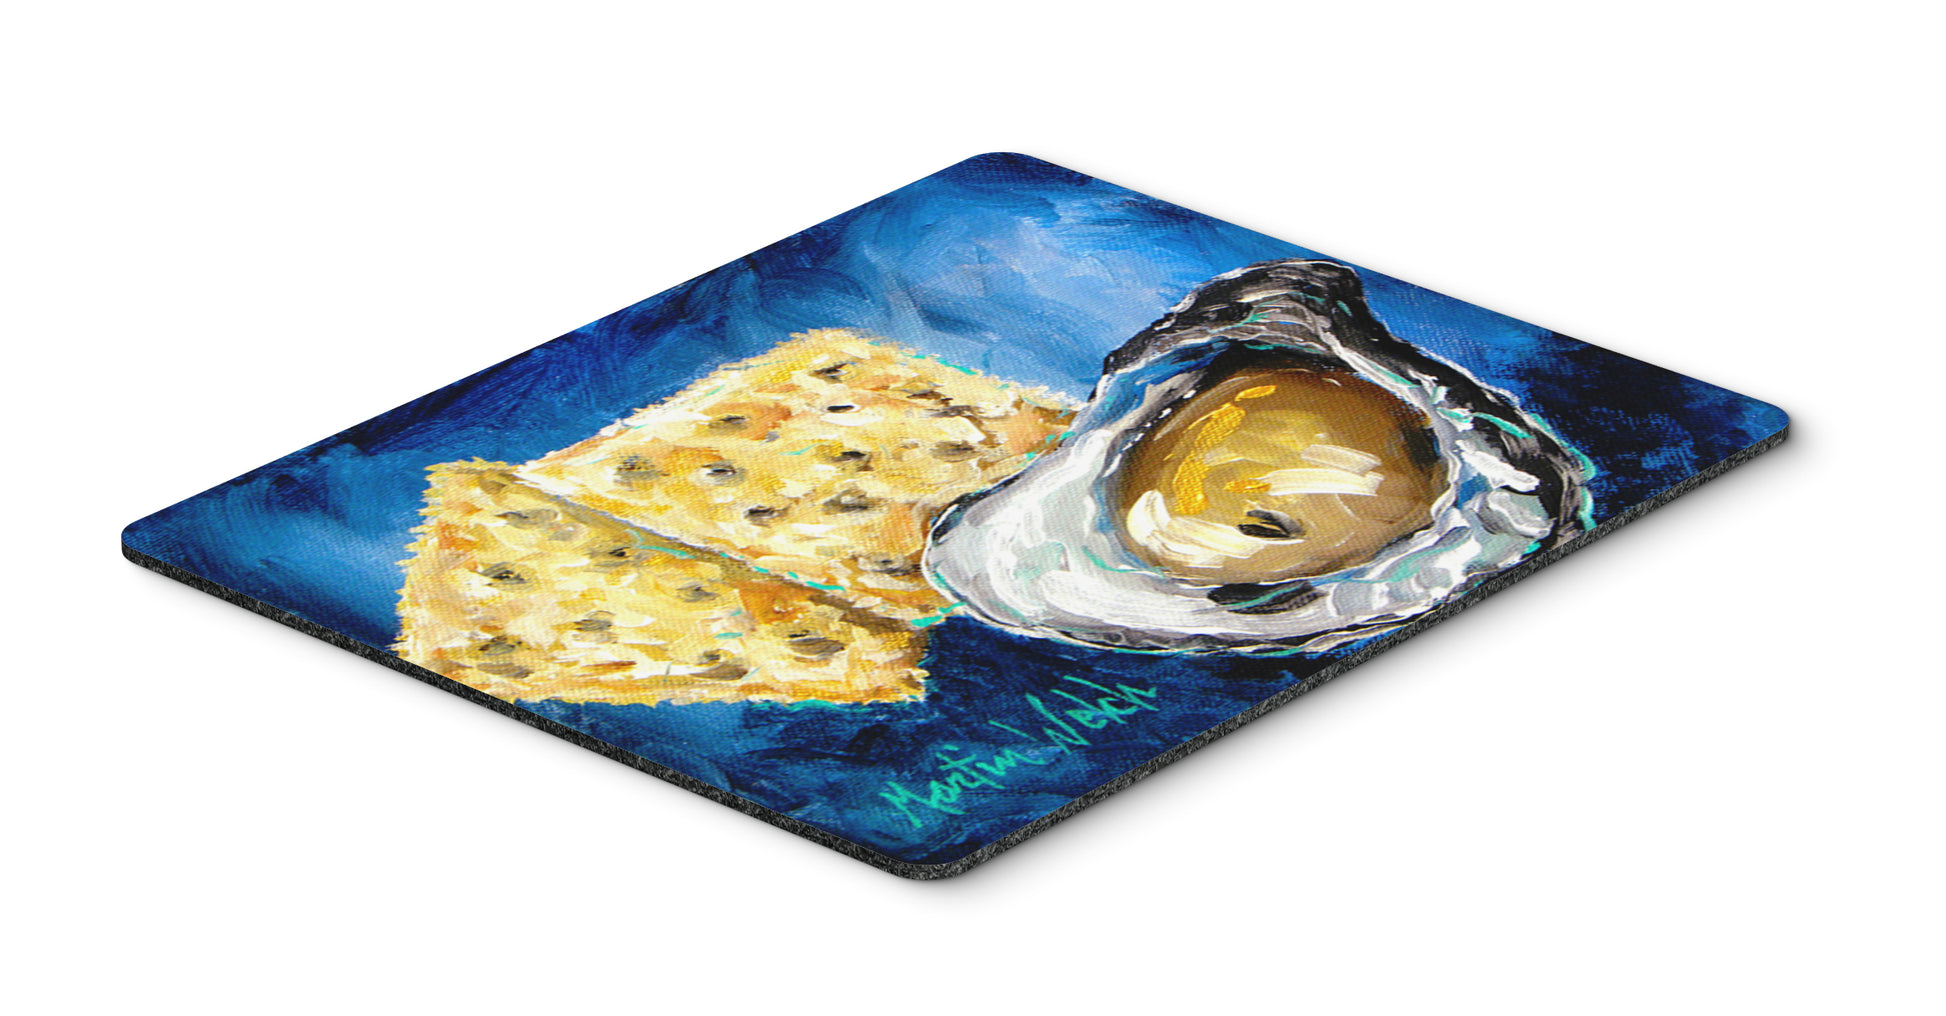 Buy this Oysters Two Crackers Mouse Pad, Hot Pad or Trivet